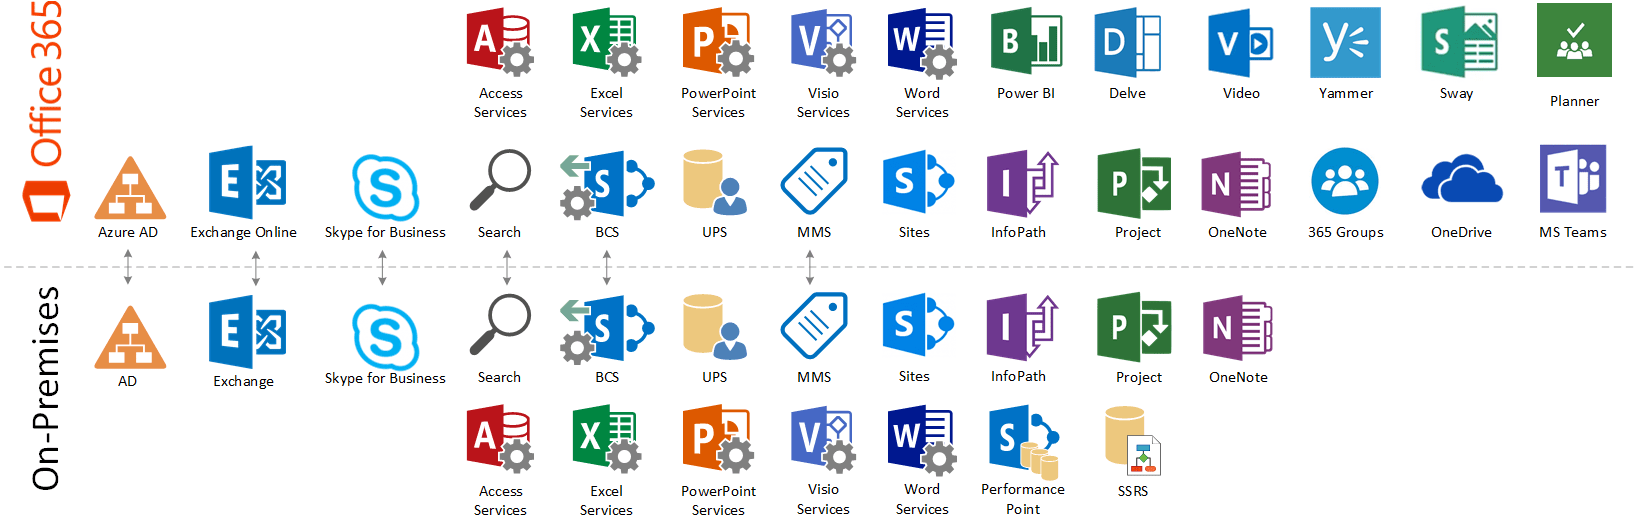 office 365 for home sharepoint